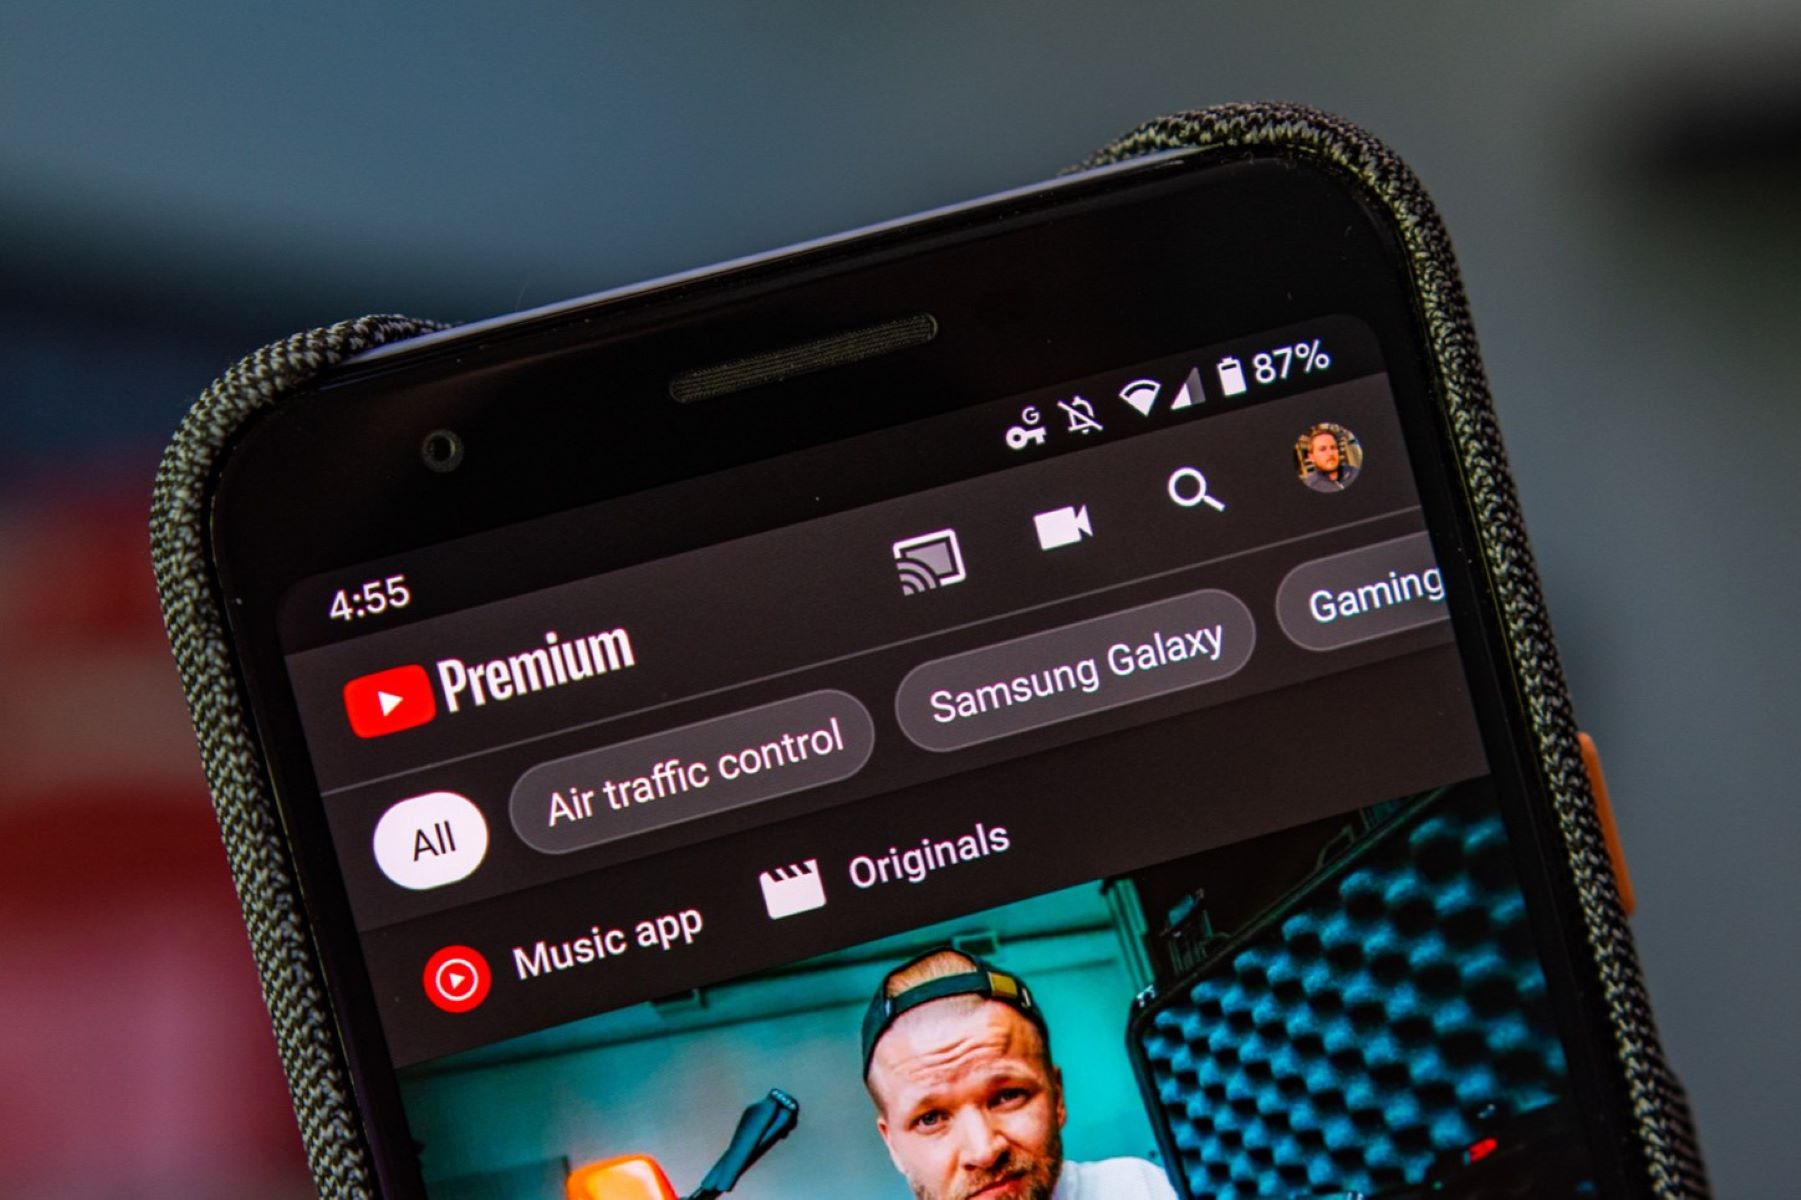 YouTube Premium Raises Monthly Price By $2 - Here's Why!